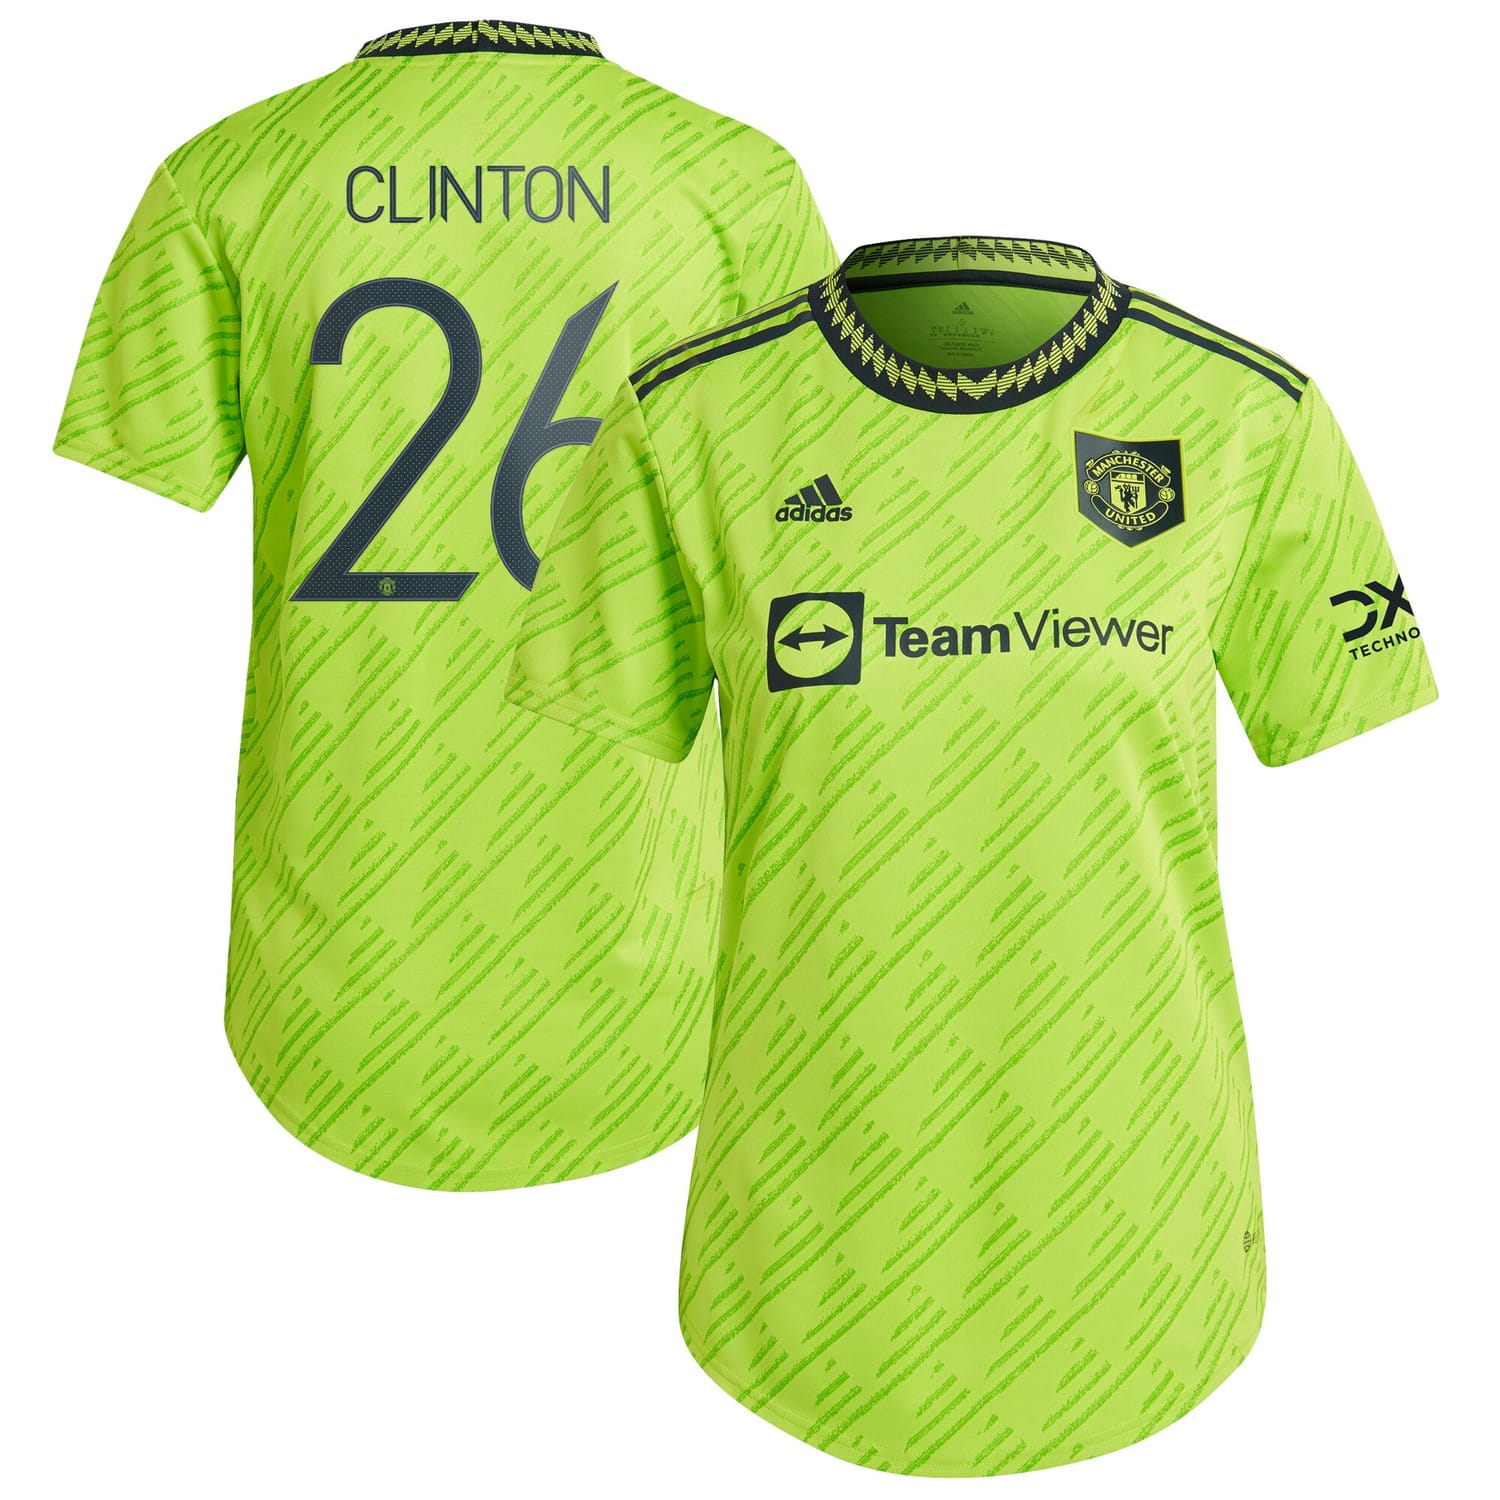 Premier League Manchester United Third Cup Authentic Jersey Shirt 2022-23 player Grace Clinton 26 printing for Women